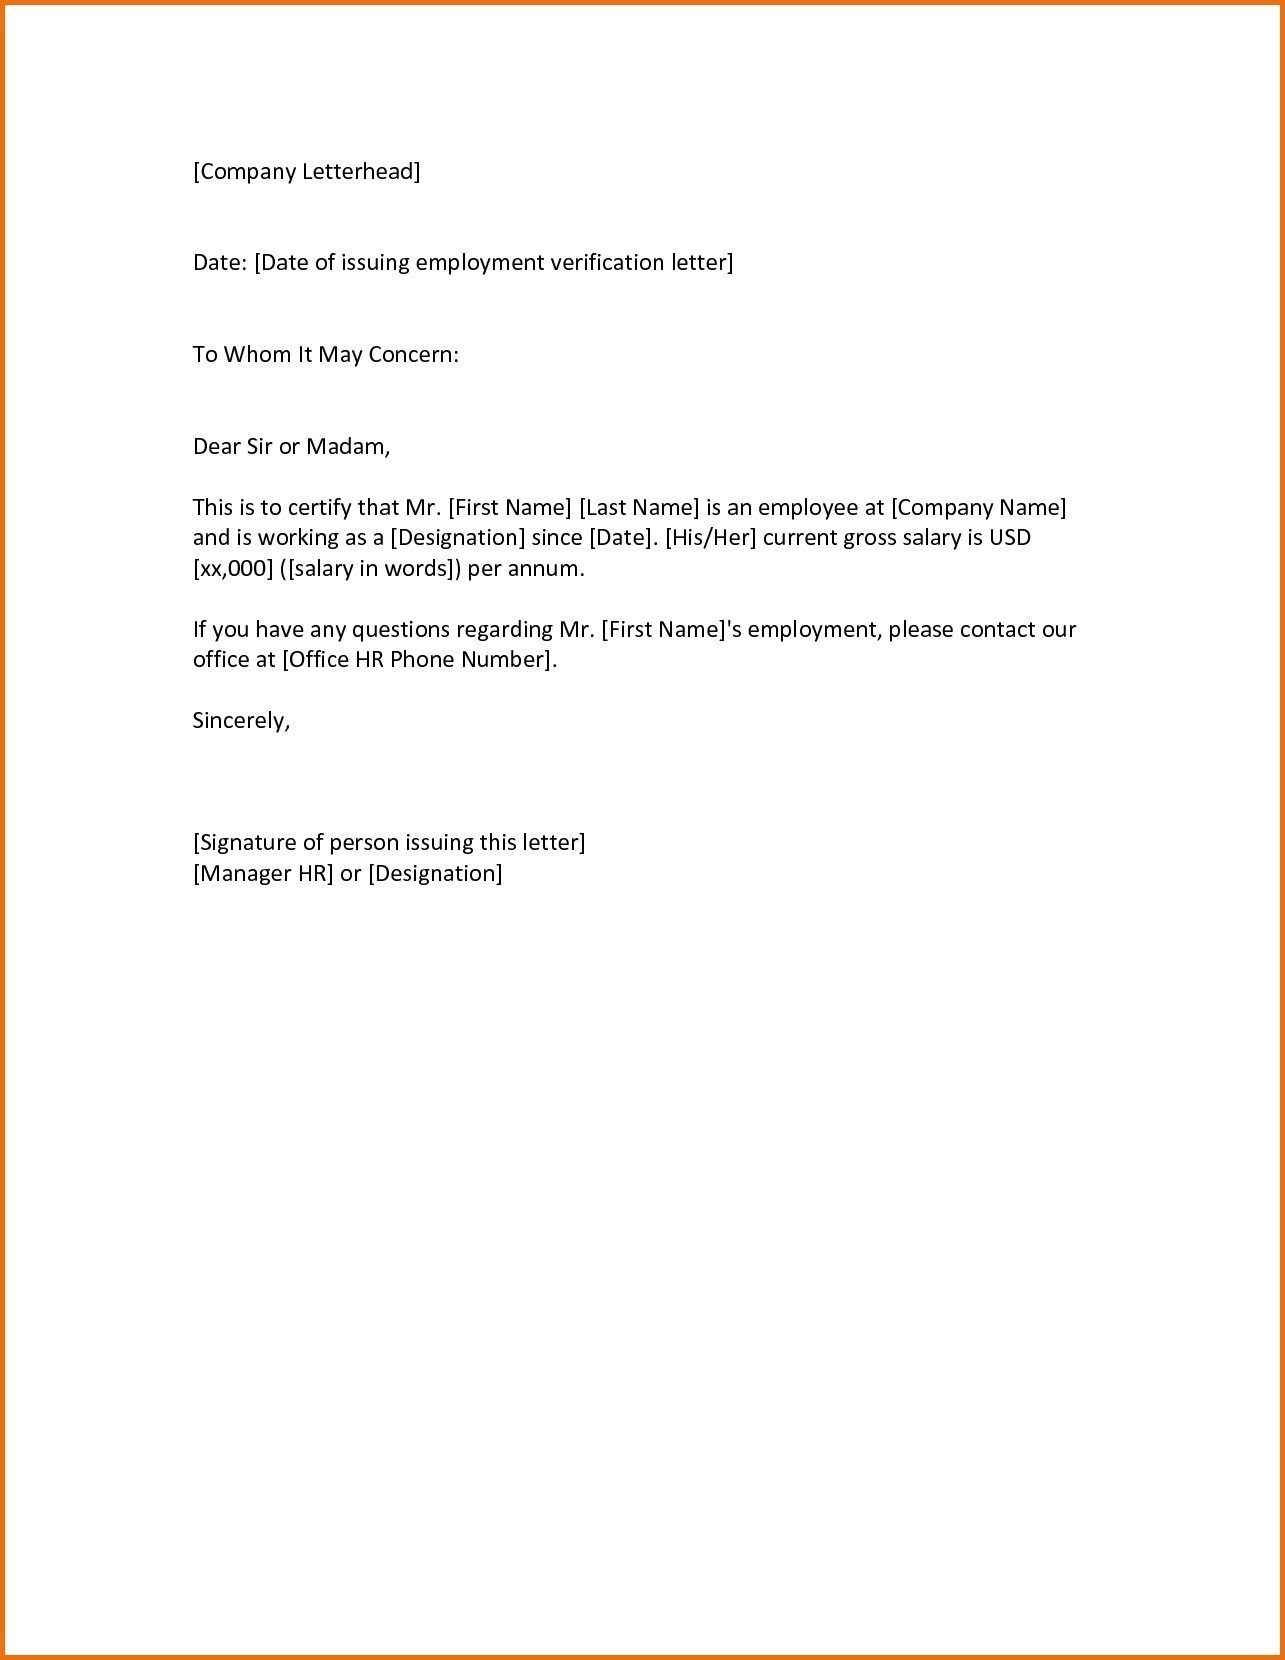 Employment Verification Letter to whom It May Concern Template - Request Letter format to whom It May Concern Fresh Pany Letter